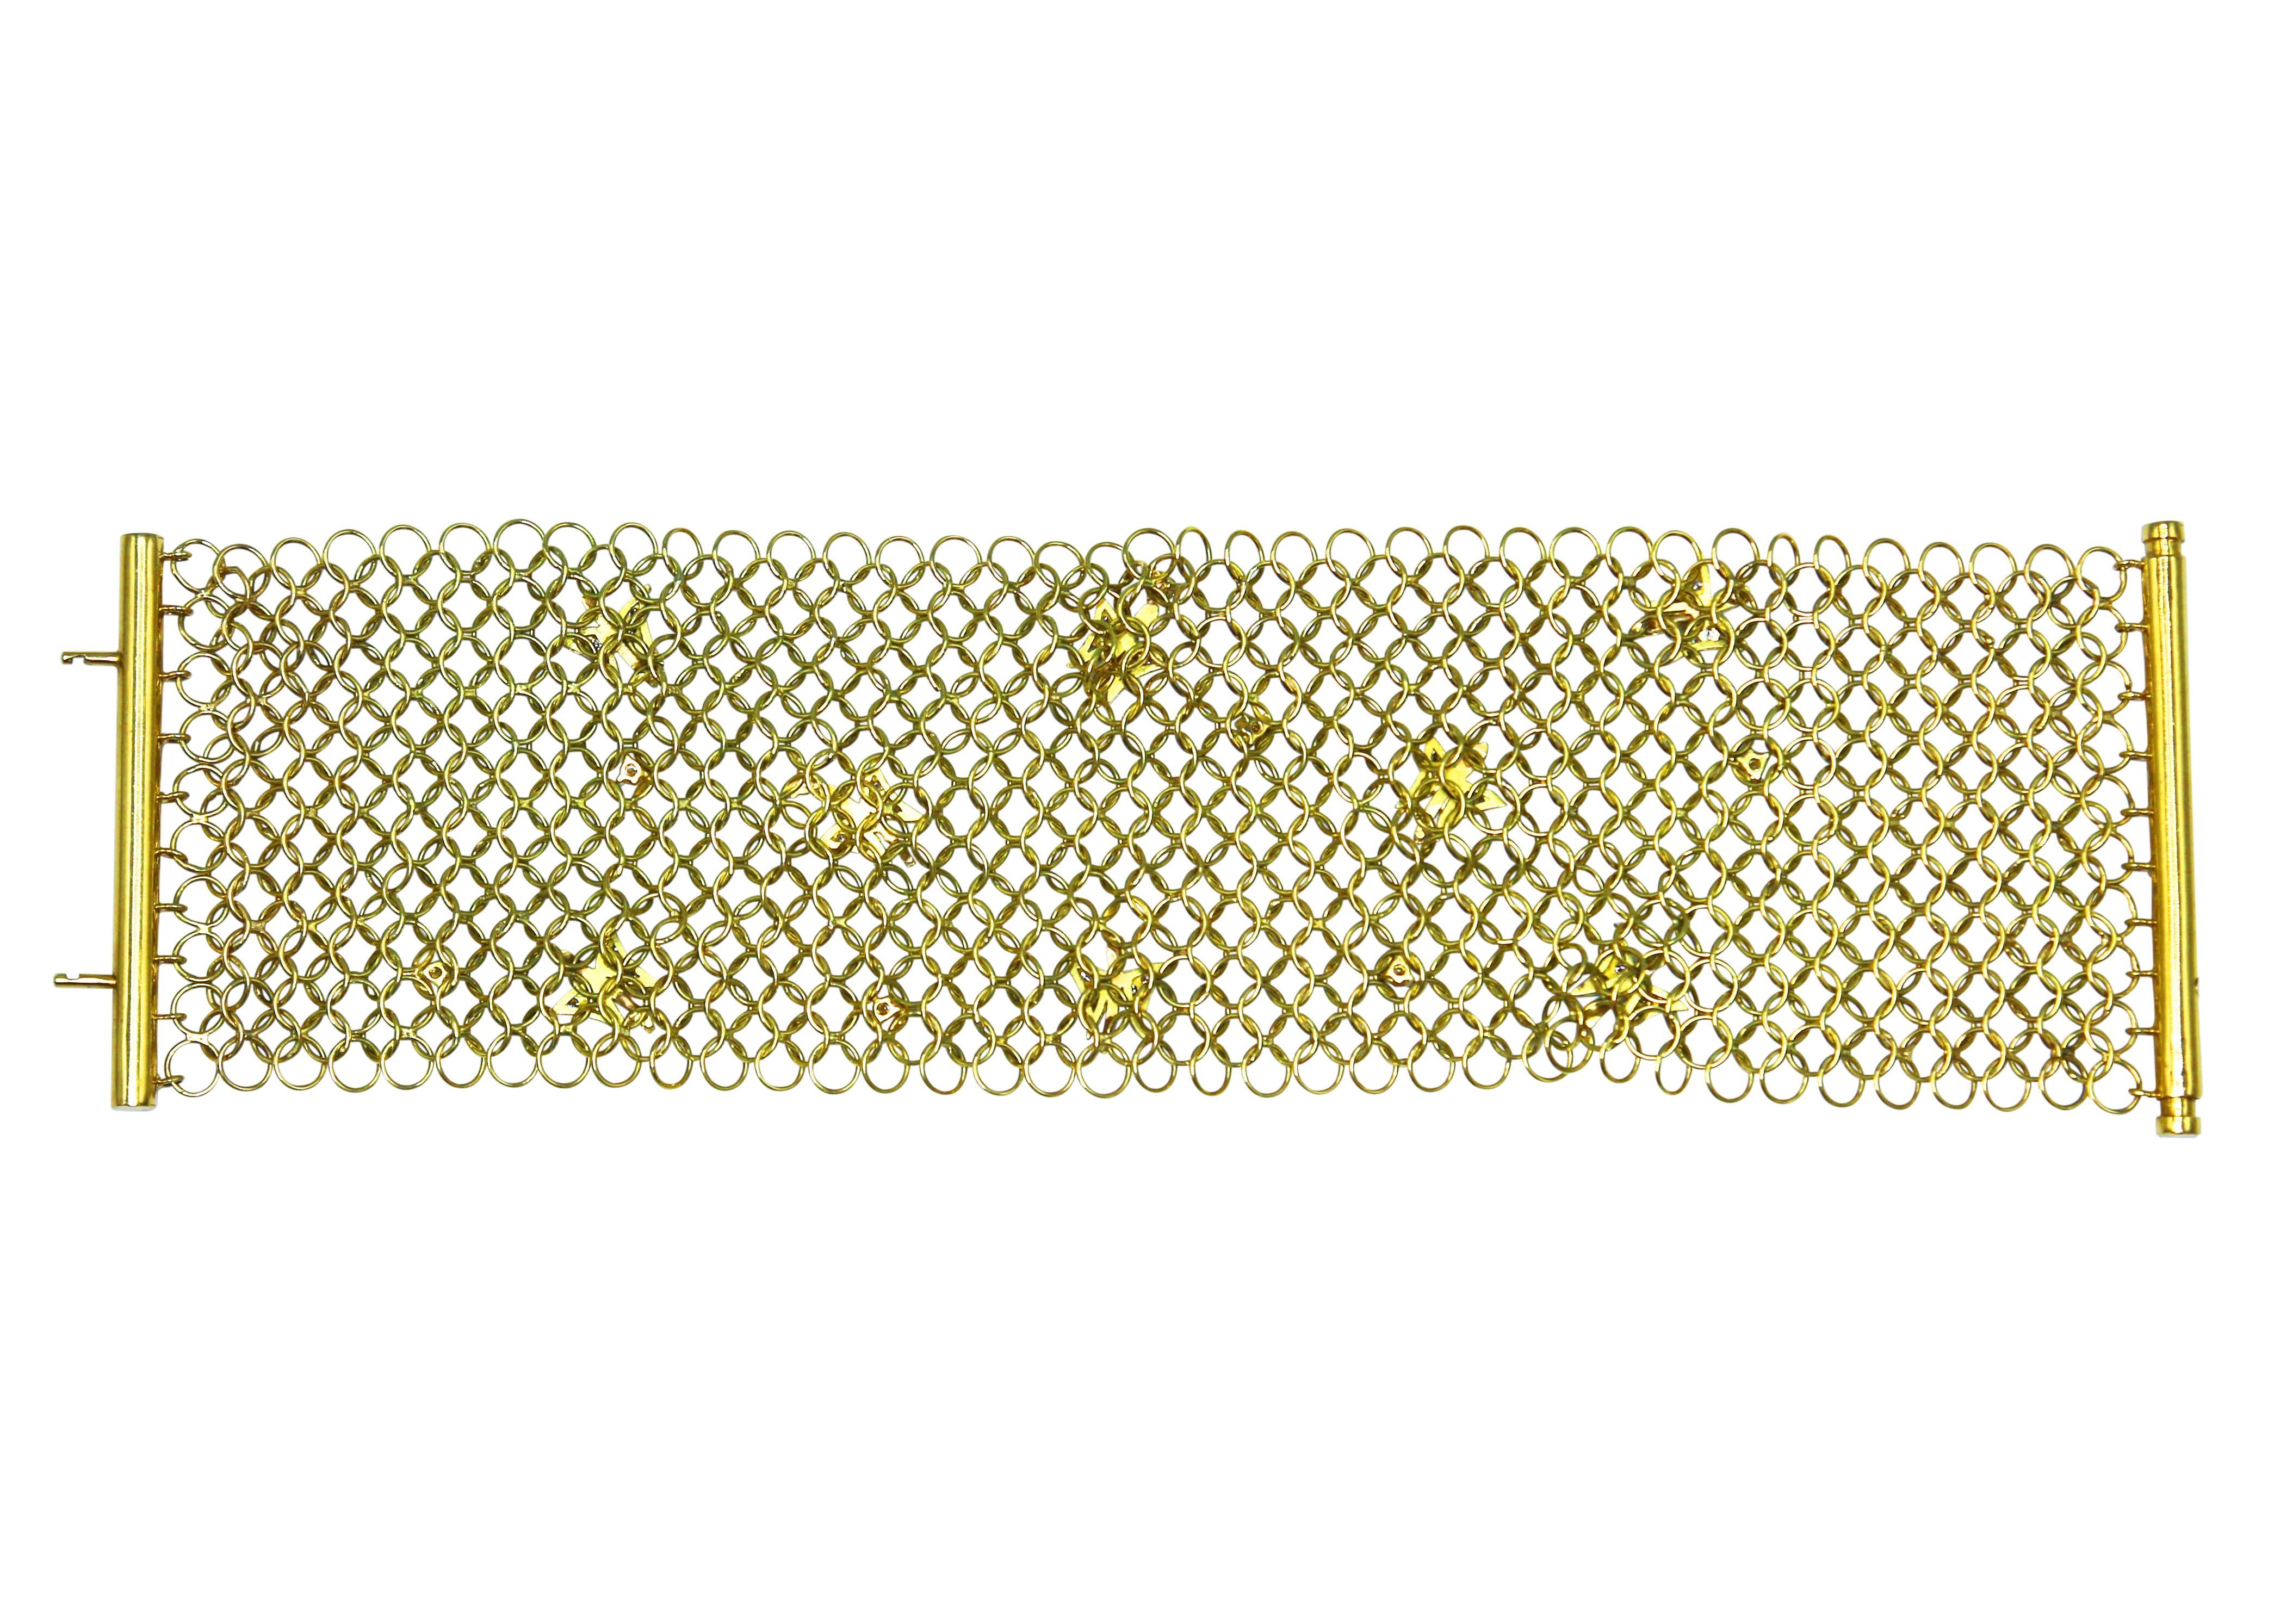 18 karat gold and diamond mesh link bracelet, Italy, the wide articulated gold link mesh strap accented by a scene of meandering butterflies accented by round diamonds weighing approximately 0.40 carat, gross weight 48.3 grams, length 7 inches,